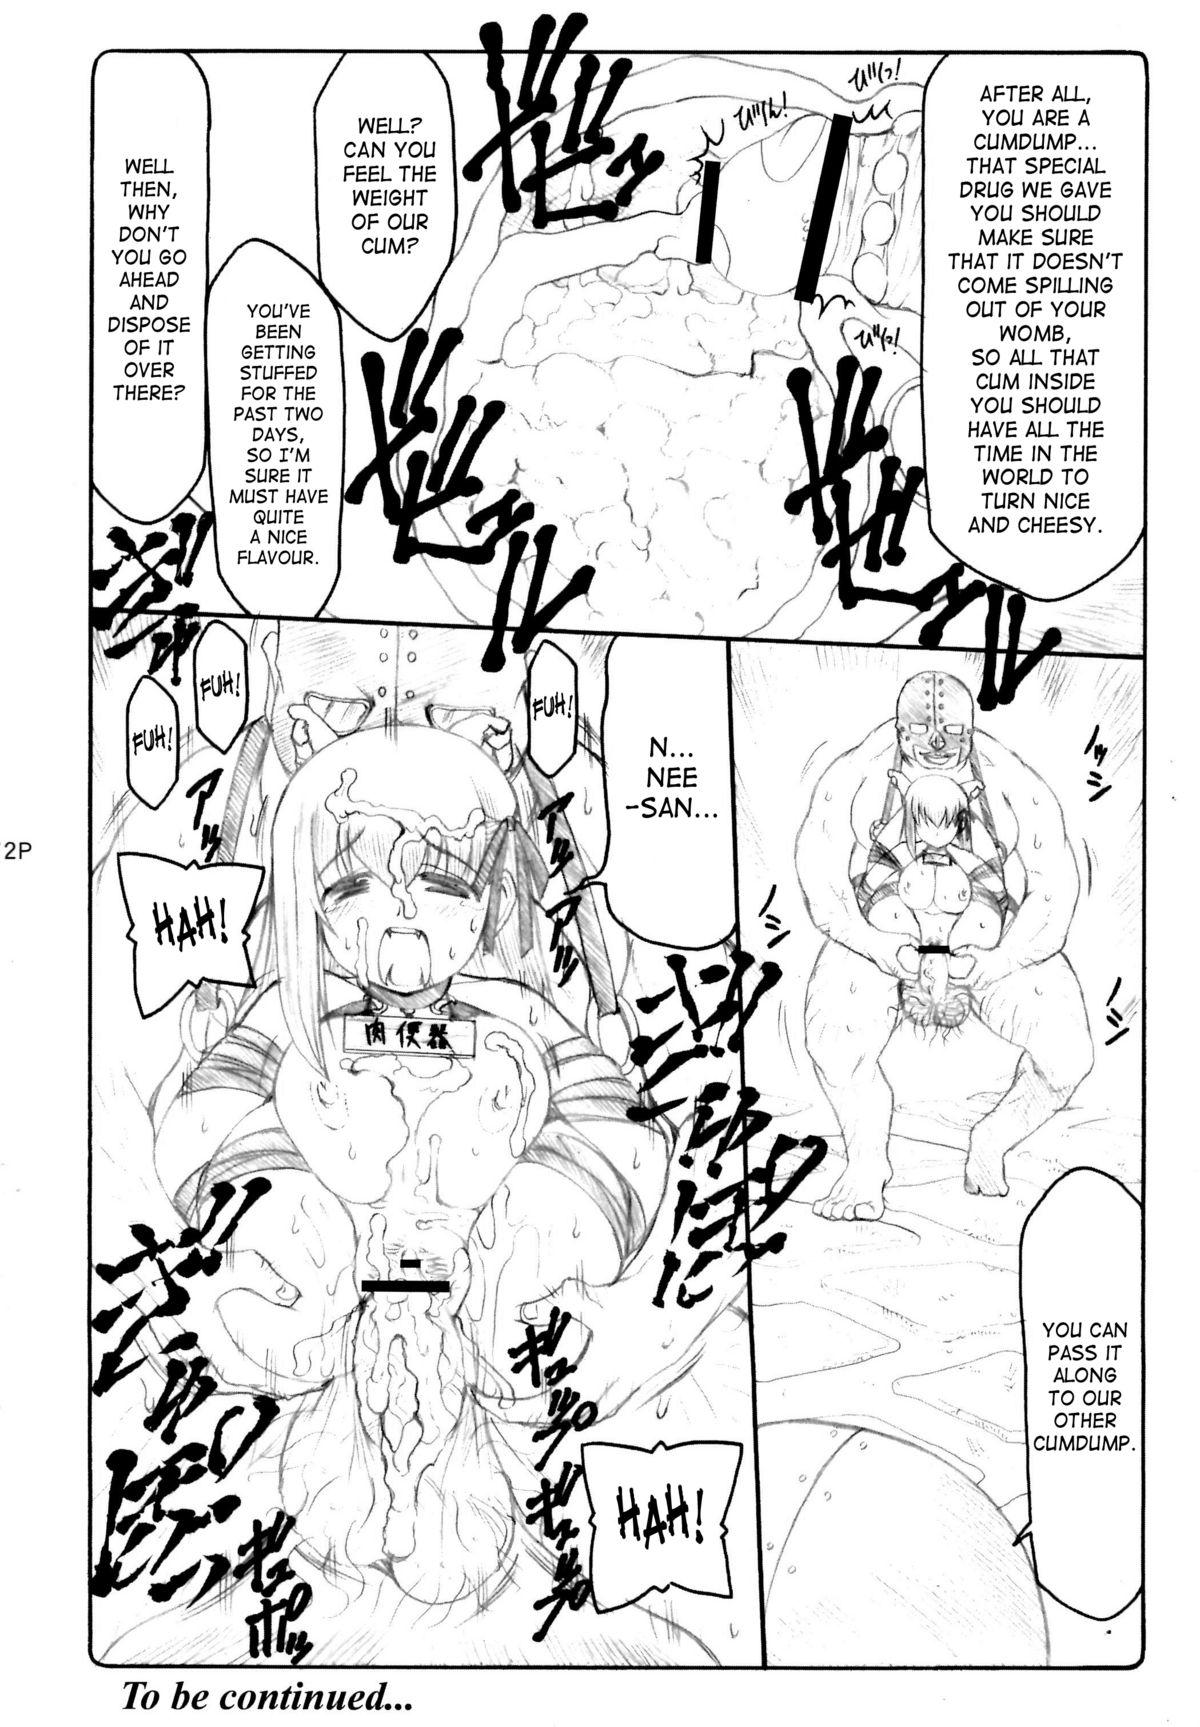 Kotori 4 & 6 Extra Pages 3